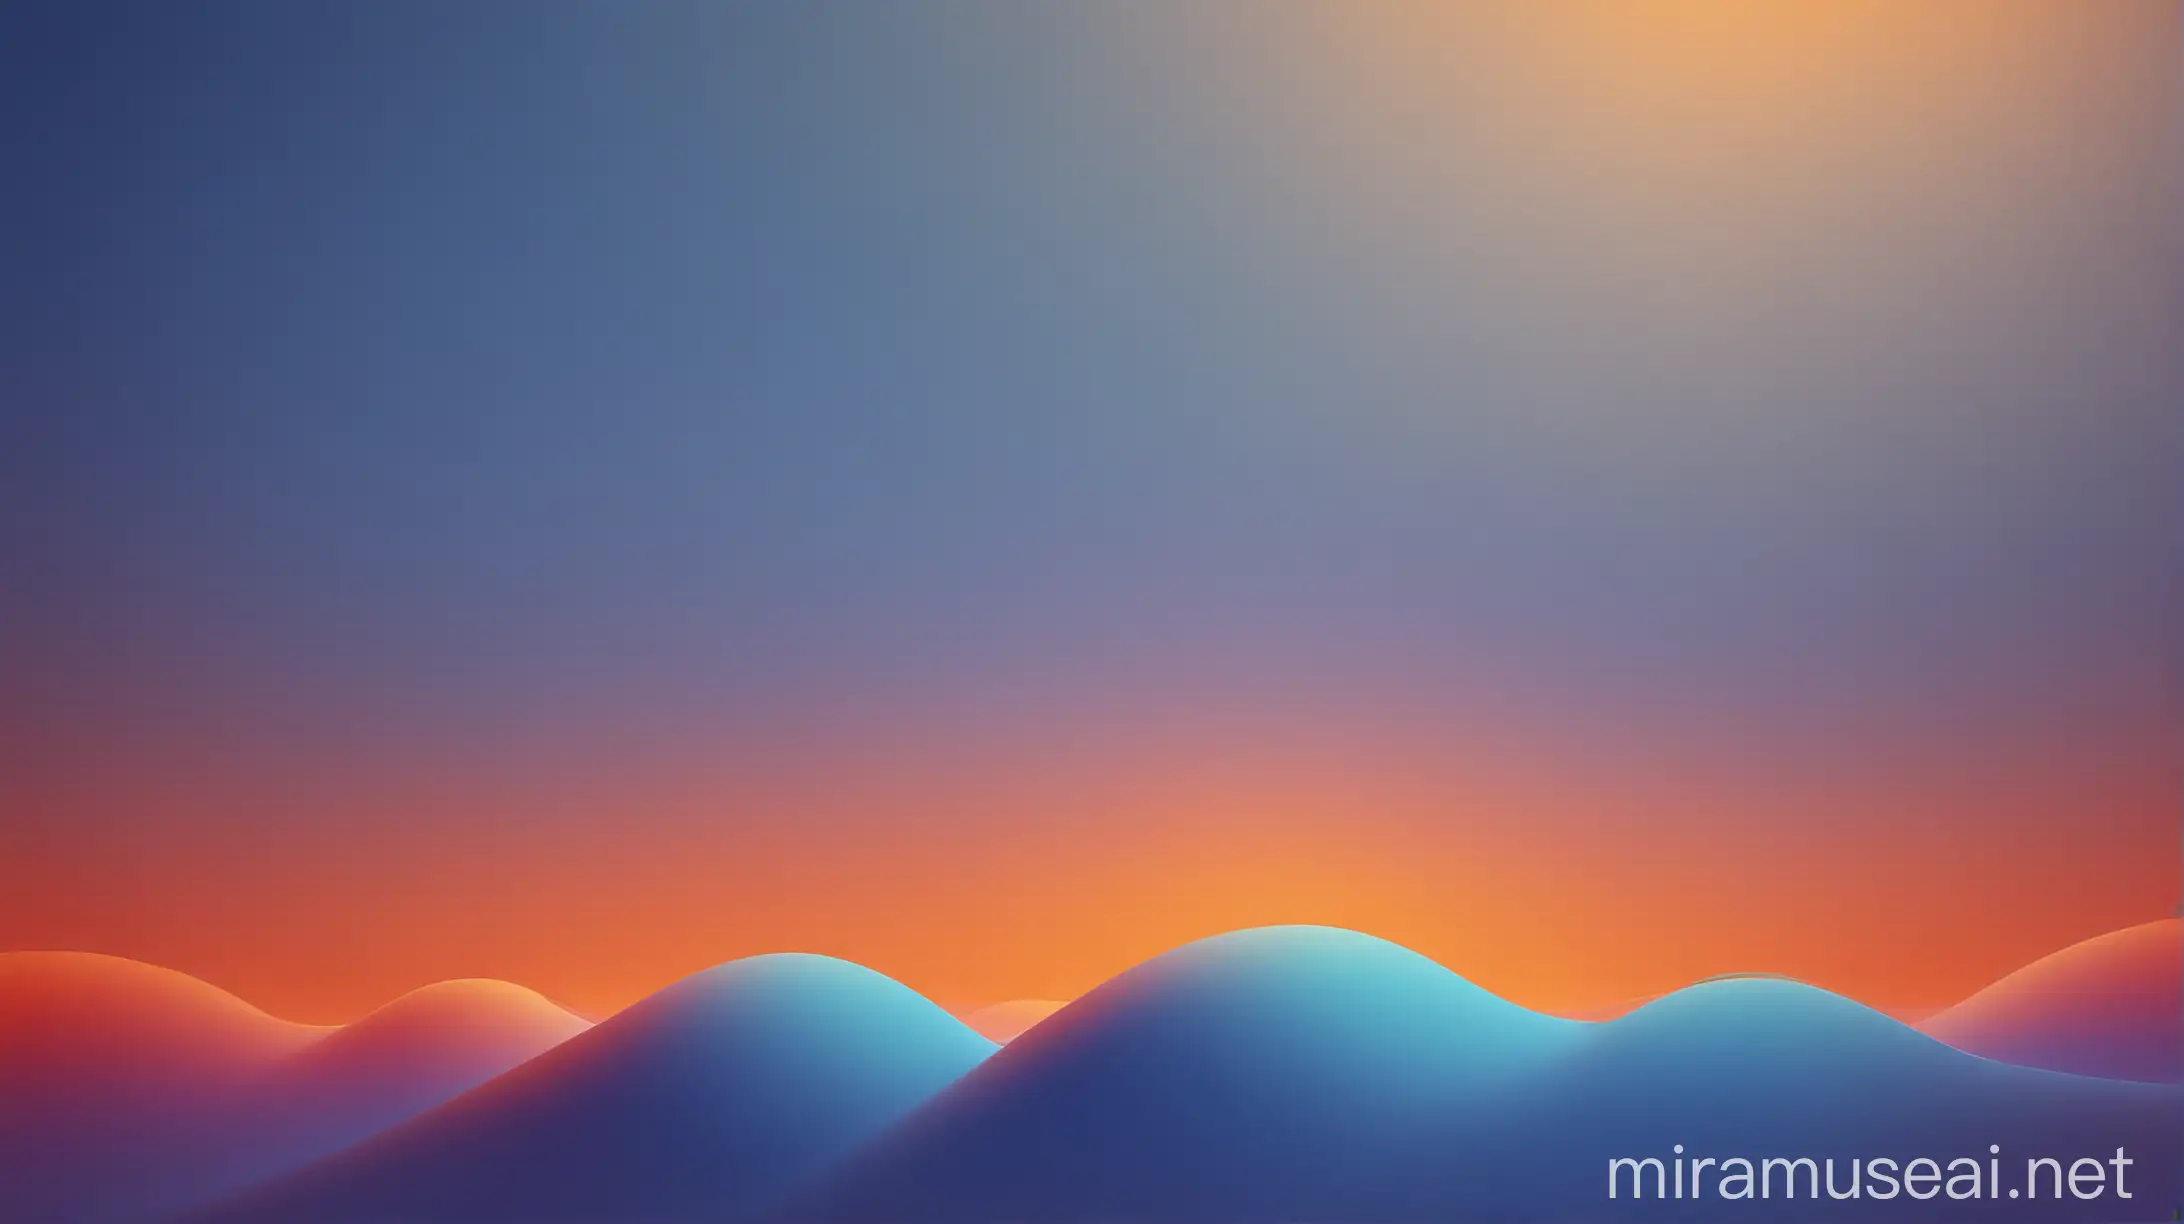 Vibrant Blue to Energetic Orange Gradient Background Symbolizing Growth and Transformation